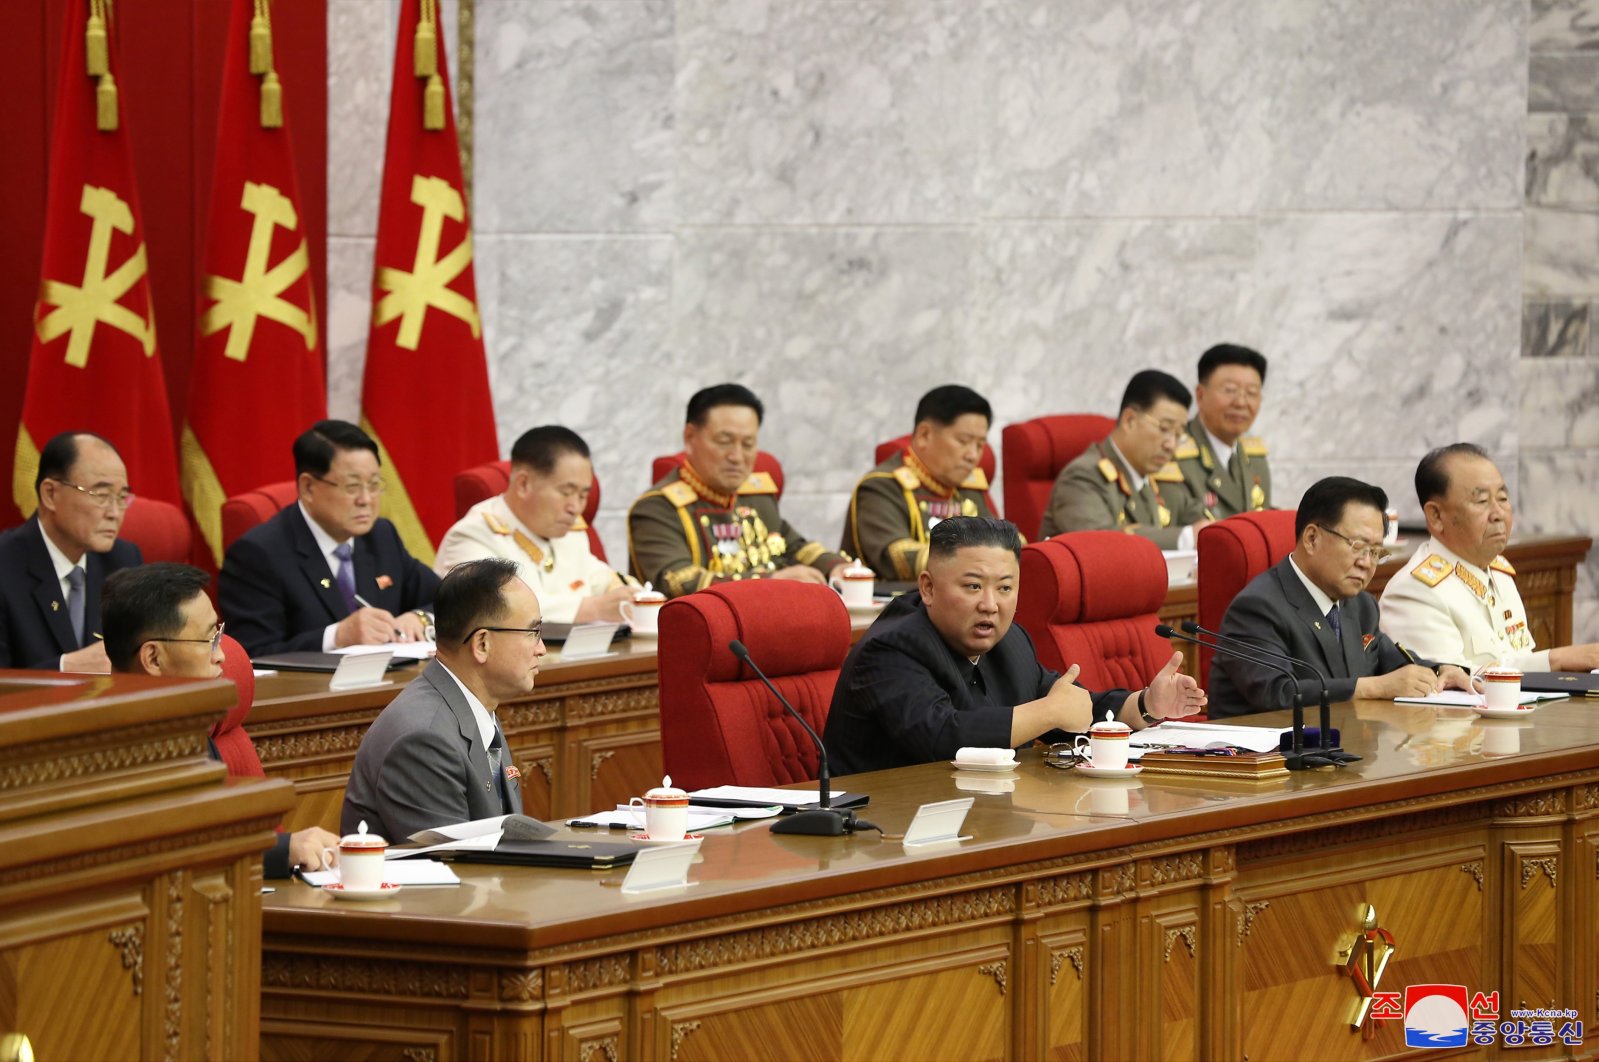 North Korean Supreme Leader Kim Jong-un (front 2-L) attending the third day sitting of the 3rd Plenary Meeting of the 8th Central Committee of the Workers' Party of Korea (WPK) in Pyongyang, North Korea, 17 June 2021. (North Korean Central News Agency photo via EPA)